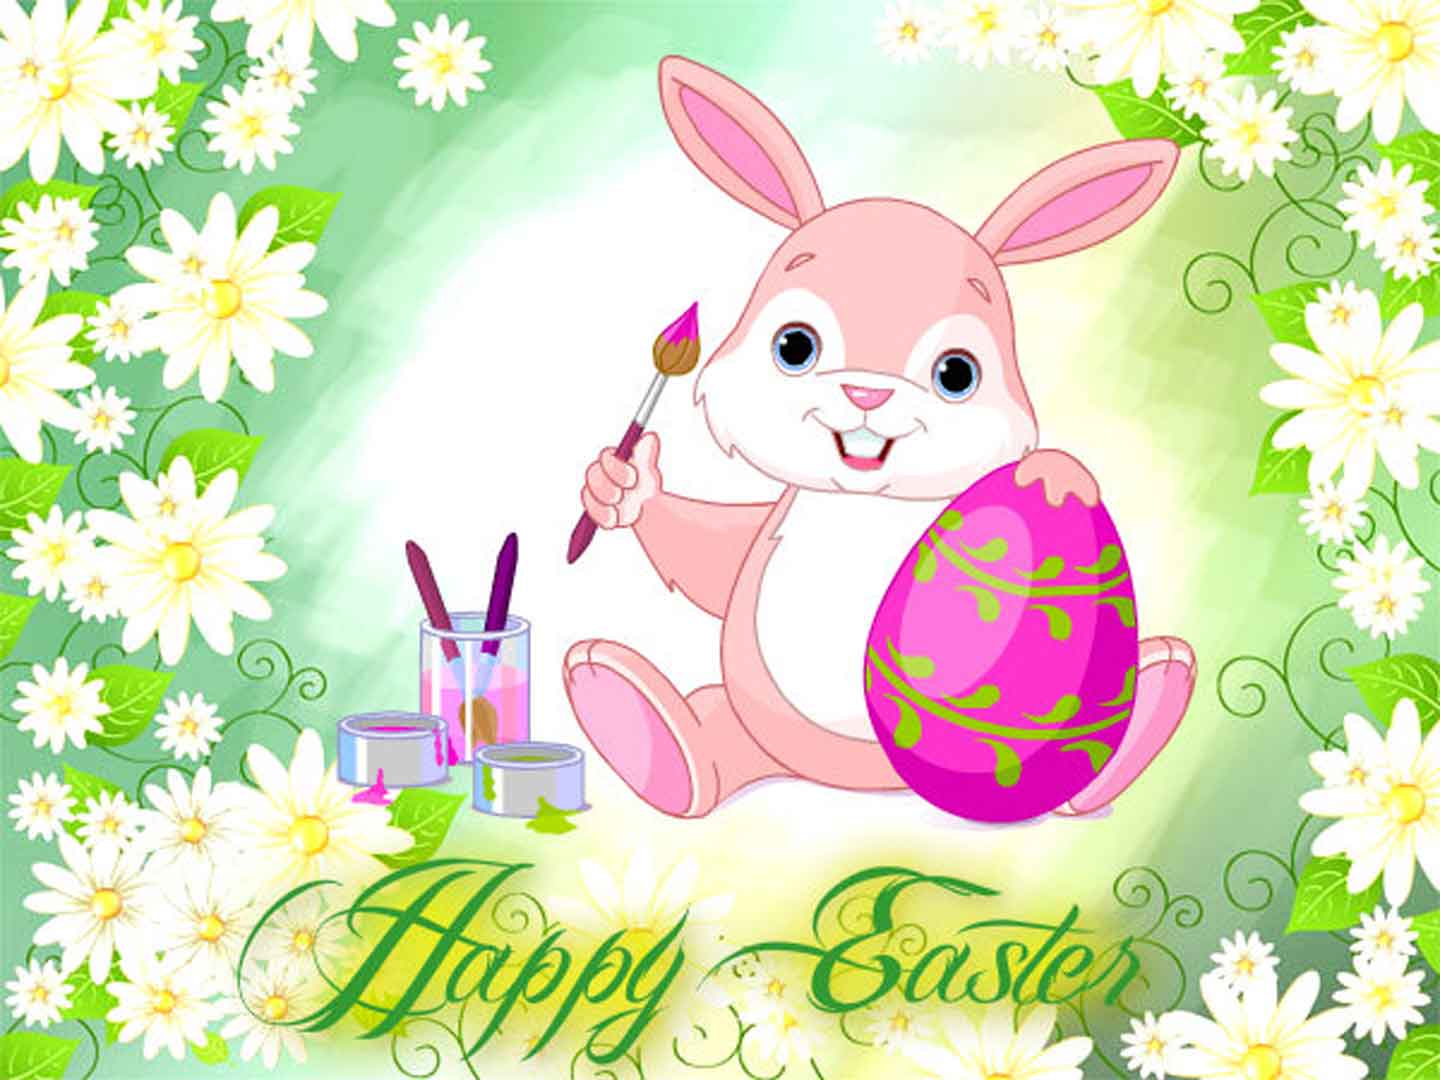 Free download Pics Photo Cute Happy Easter Wallpaper Cute Happy [1440x1080] for your Desktop, Mobile & Tablet. Explore Cute Easter Wallpaper. Easter Desktop Wallpaper, Happy Easter Wallpaper, Cute Easter Bunny Wallpaper